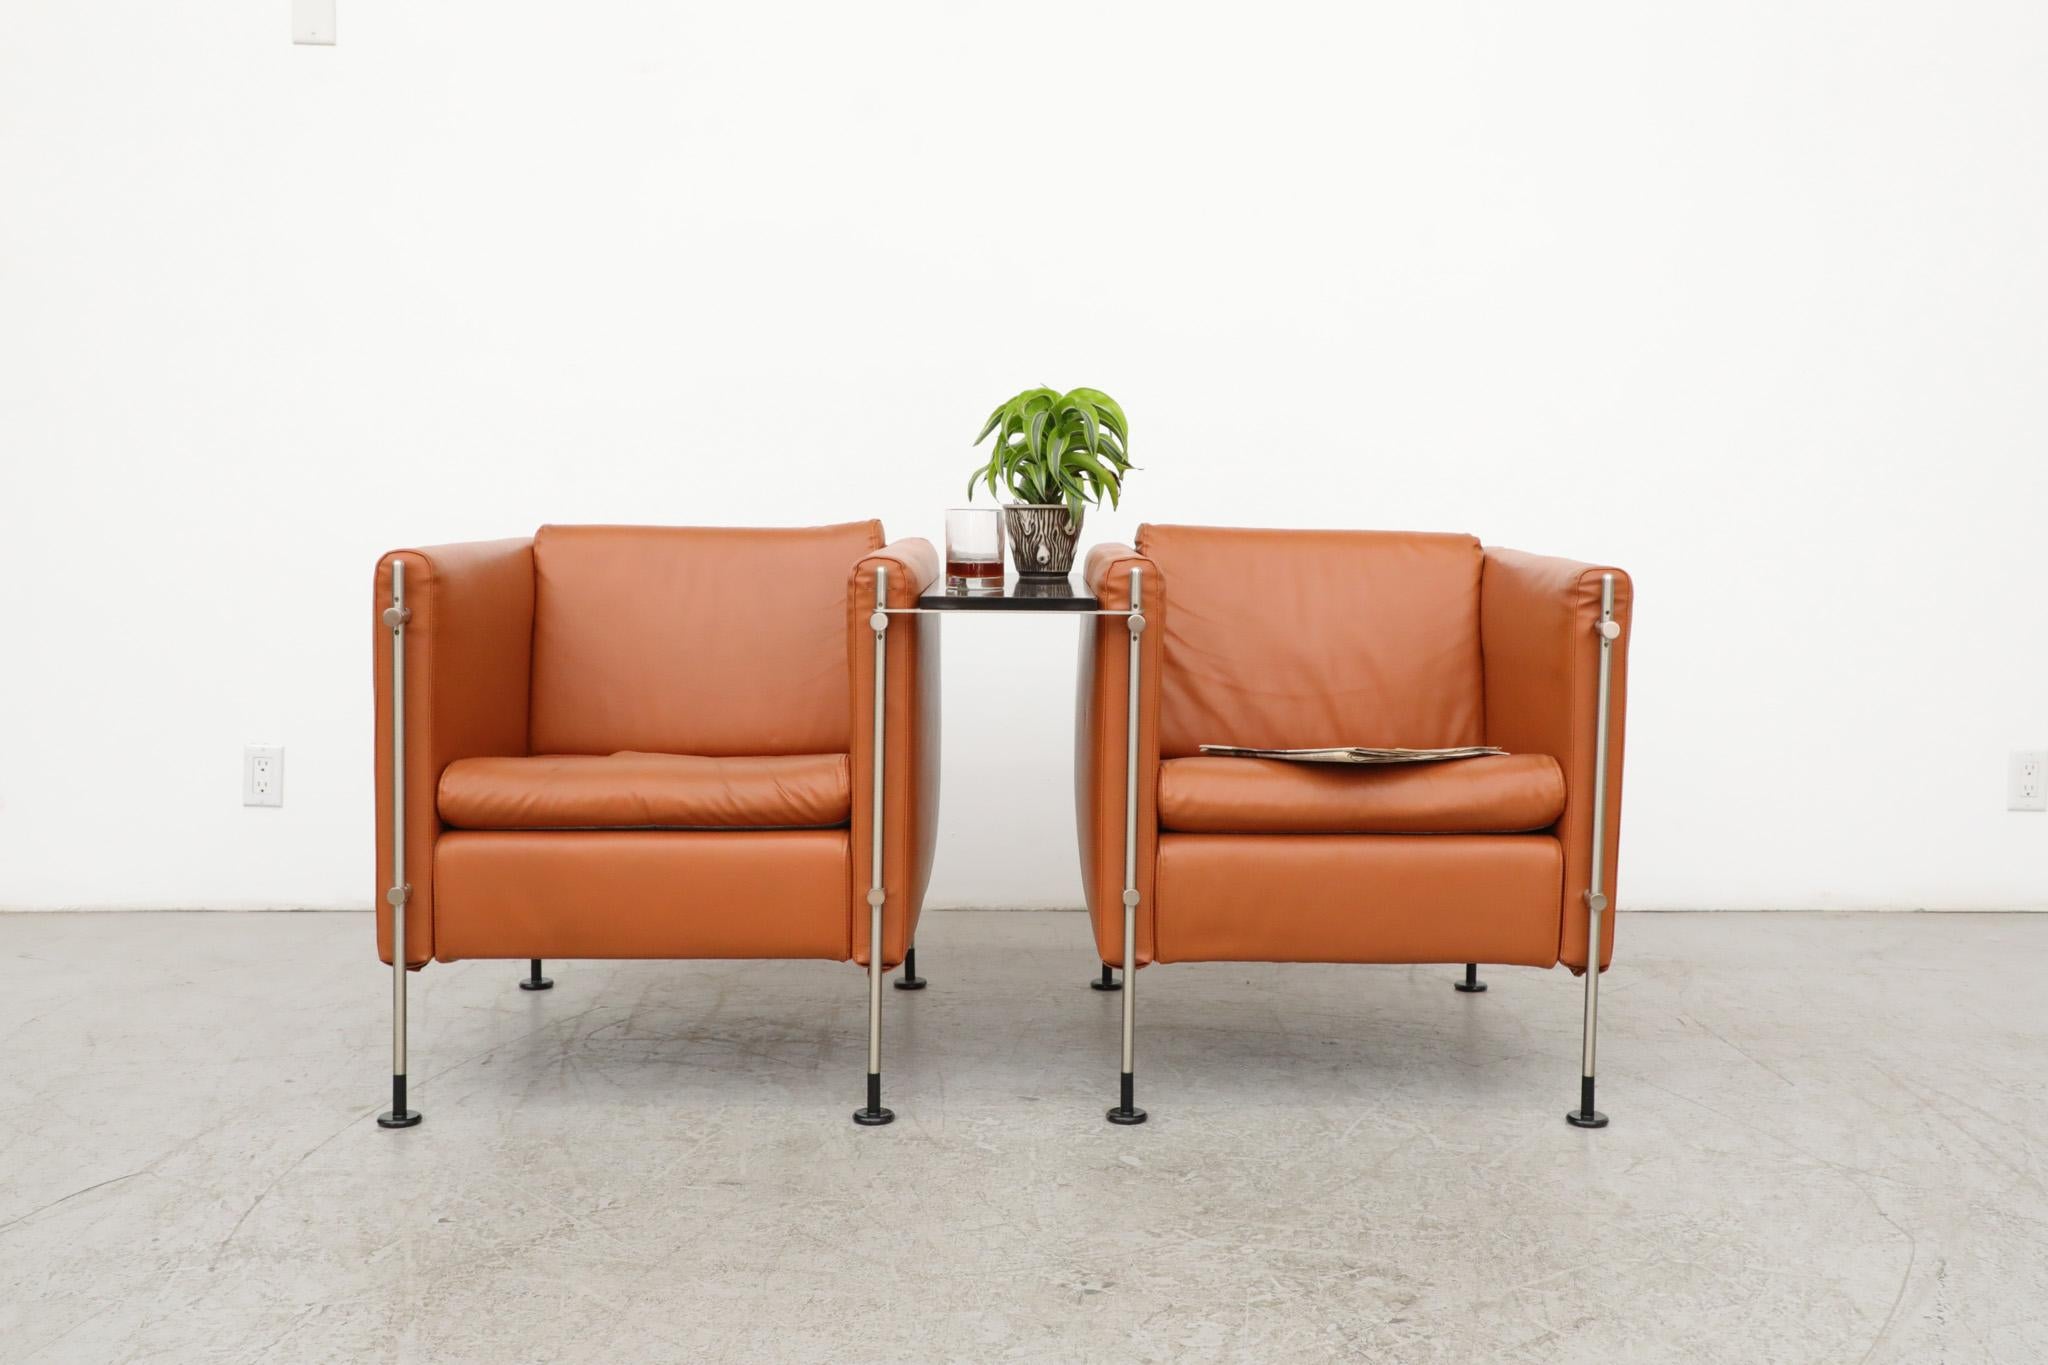 Impressive pair of mid-century, burnt orange colored, ‘Felix' lounge chairs designed by Burkhard Vogtherr for Italian furniture maker Arflex, a leading voice in Italian design since 1947. This set was manufactured in 1985 and has faux leather seats